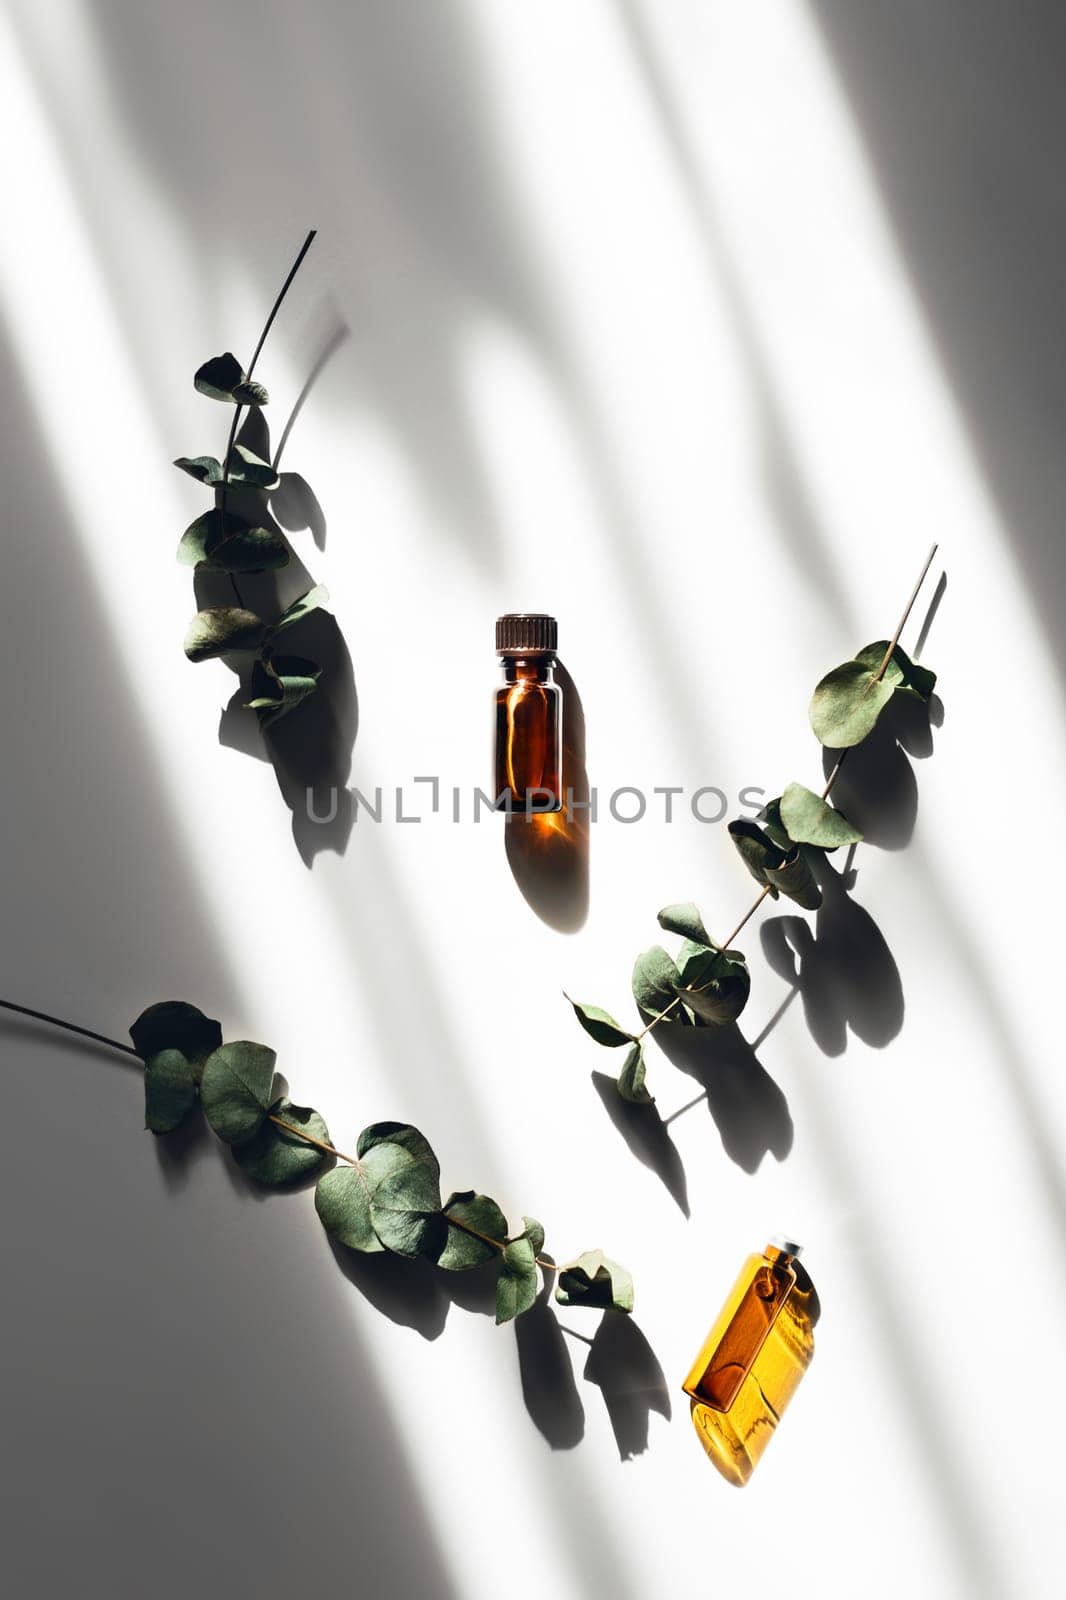 Stay at home and be mentally balanced with aromatherapy. Two bottles of aromas lying on a white table in the shade from the sun and surrounded by eucalyptus.